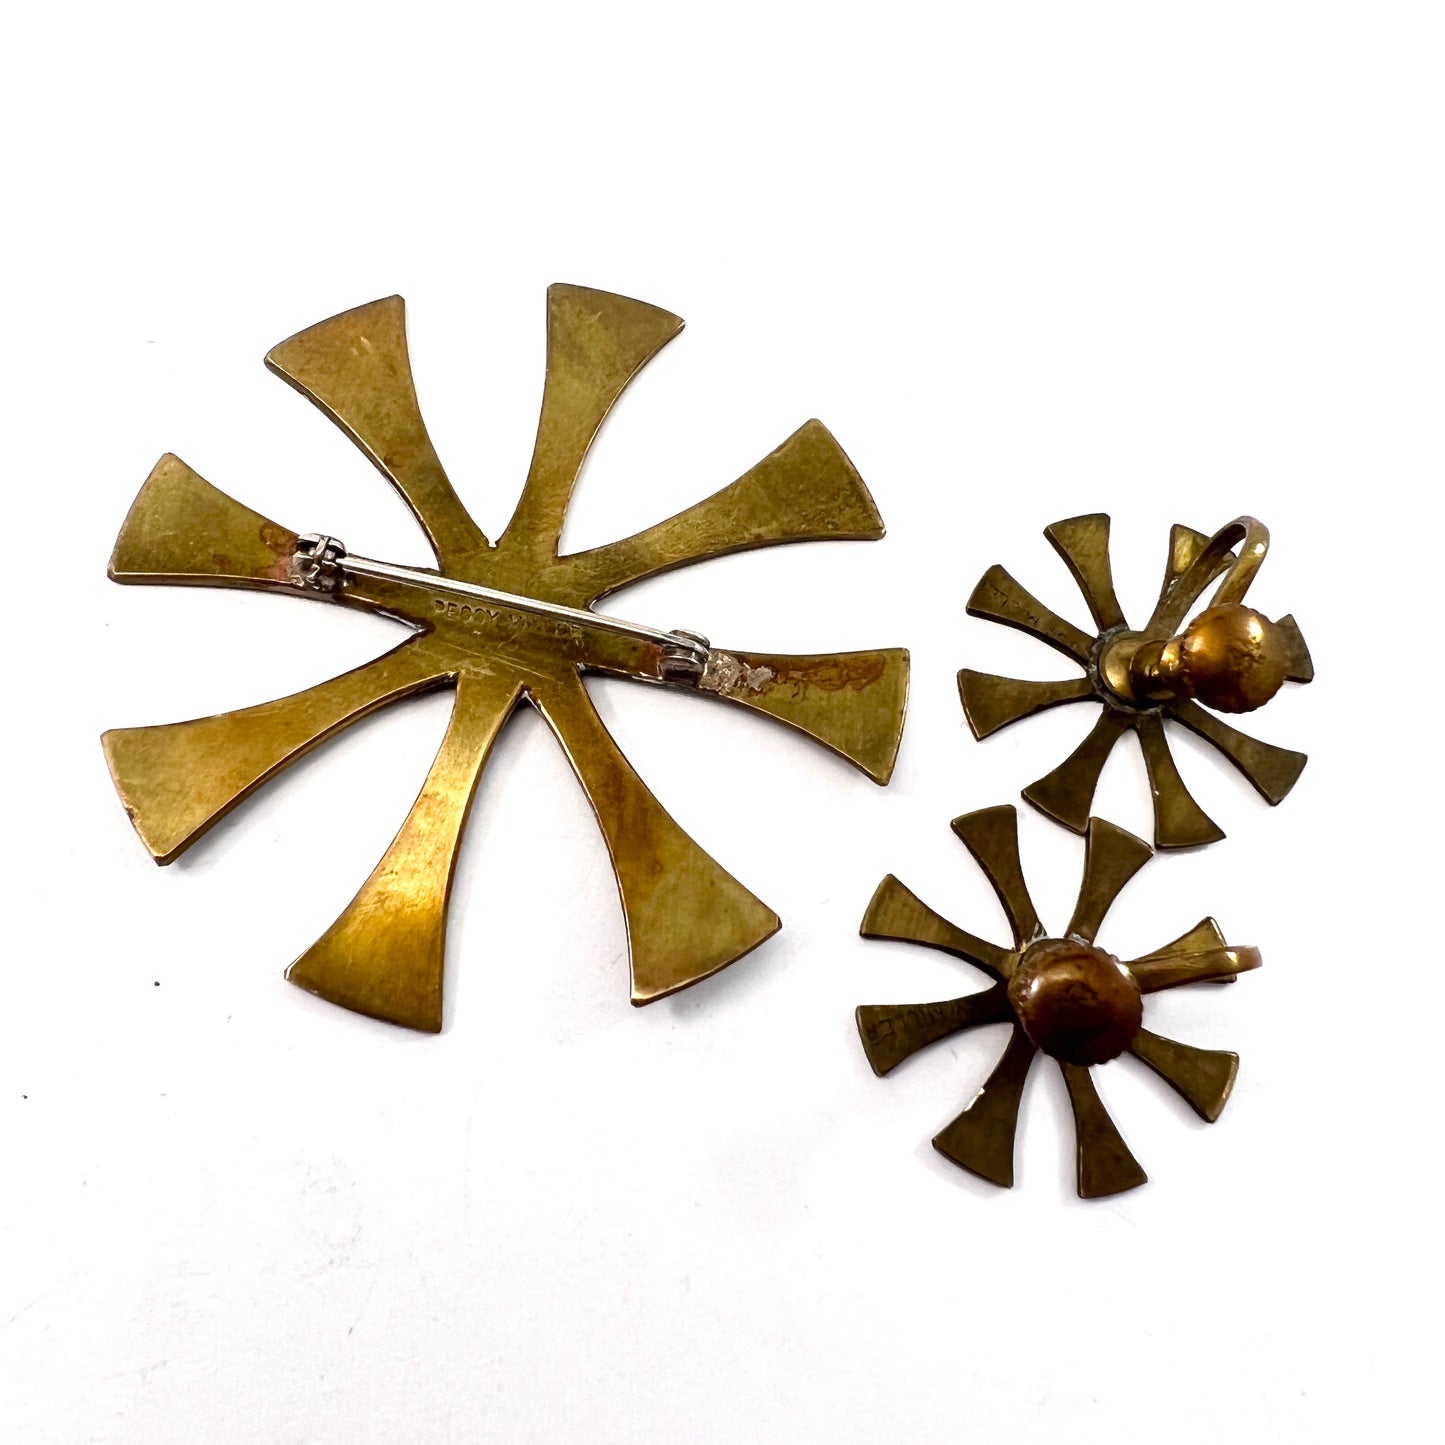 Peggy Miller, USA 1950-60s. Signed Brass Brooch and Earrings.